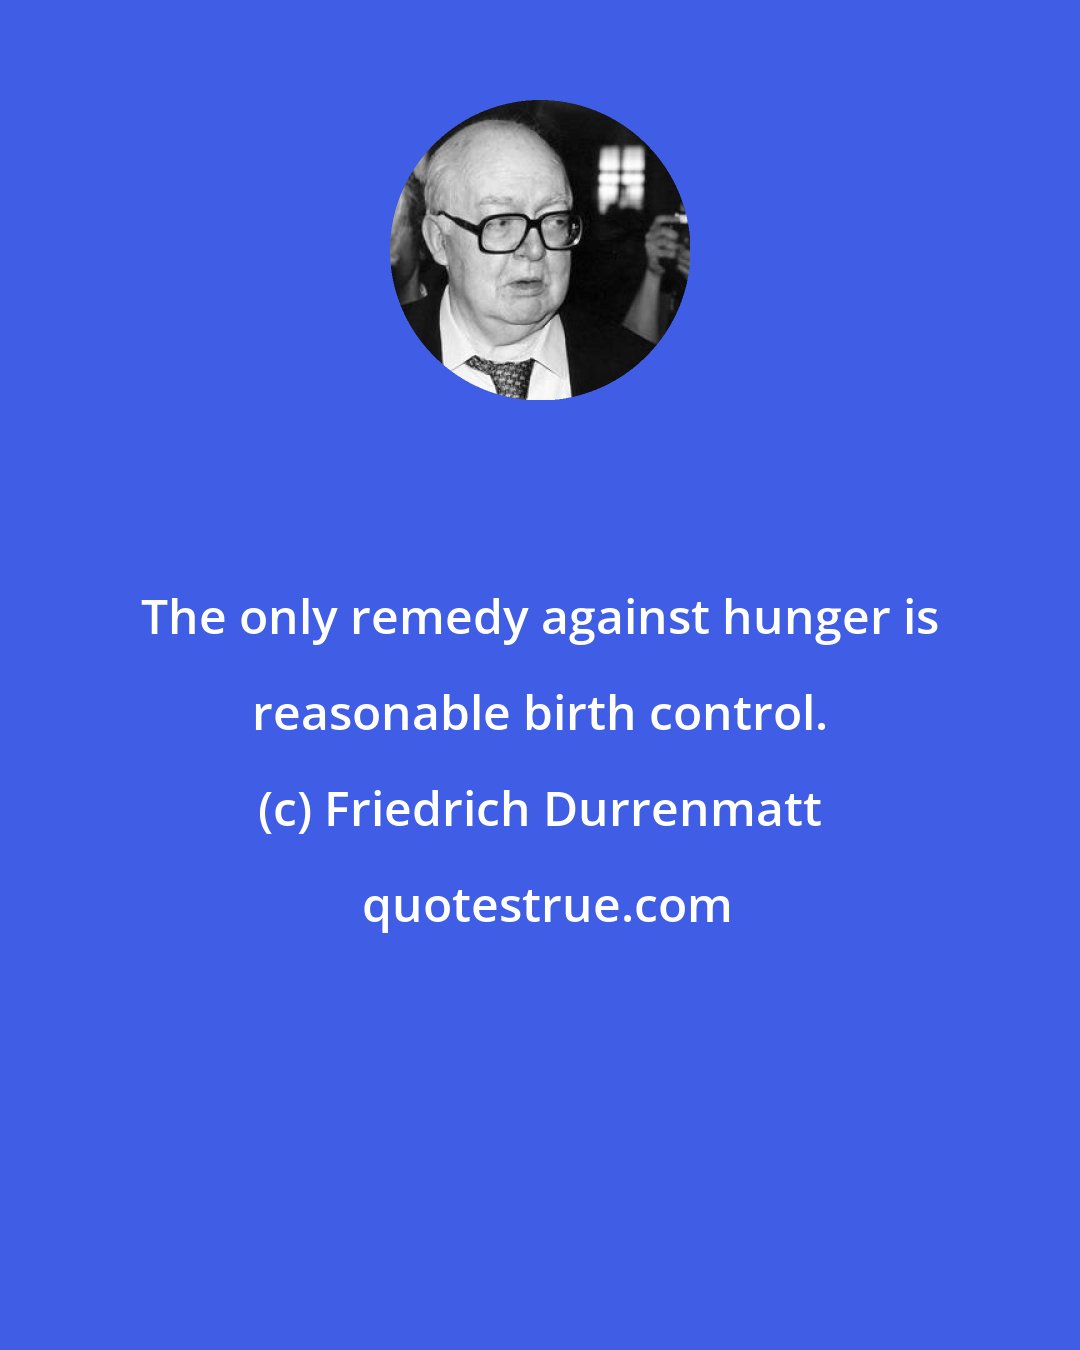 Friedrich Durrenmatt: The only remedy against hunger is reasonable birth control.